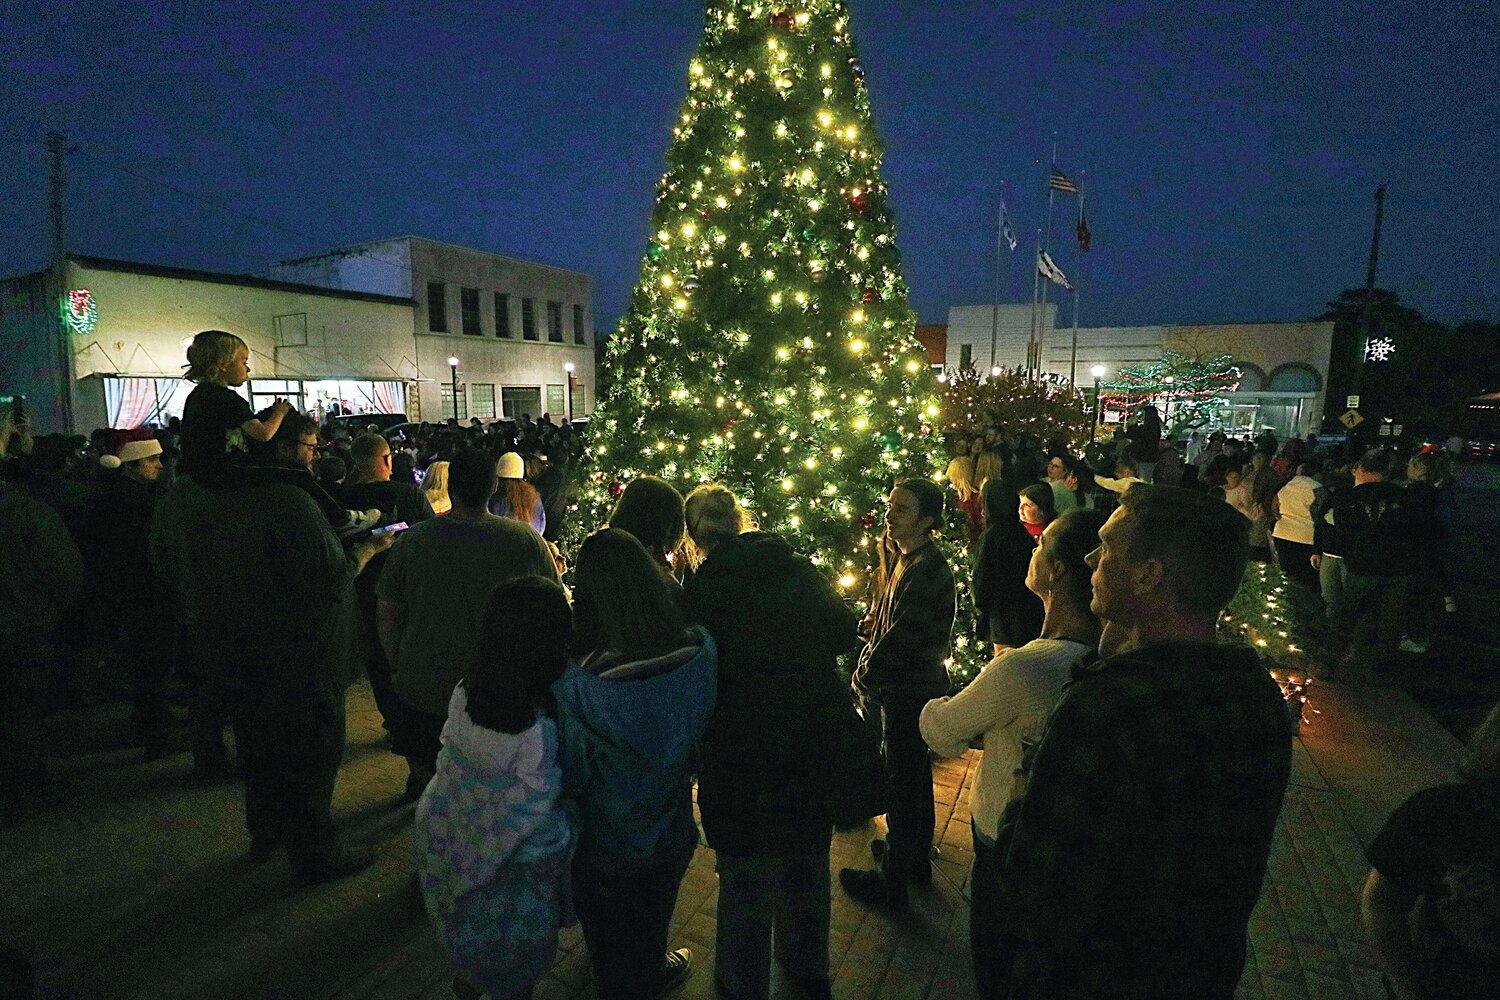 People enjoy the glow of the Christmas tree.